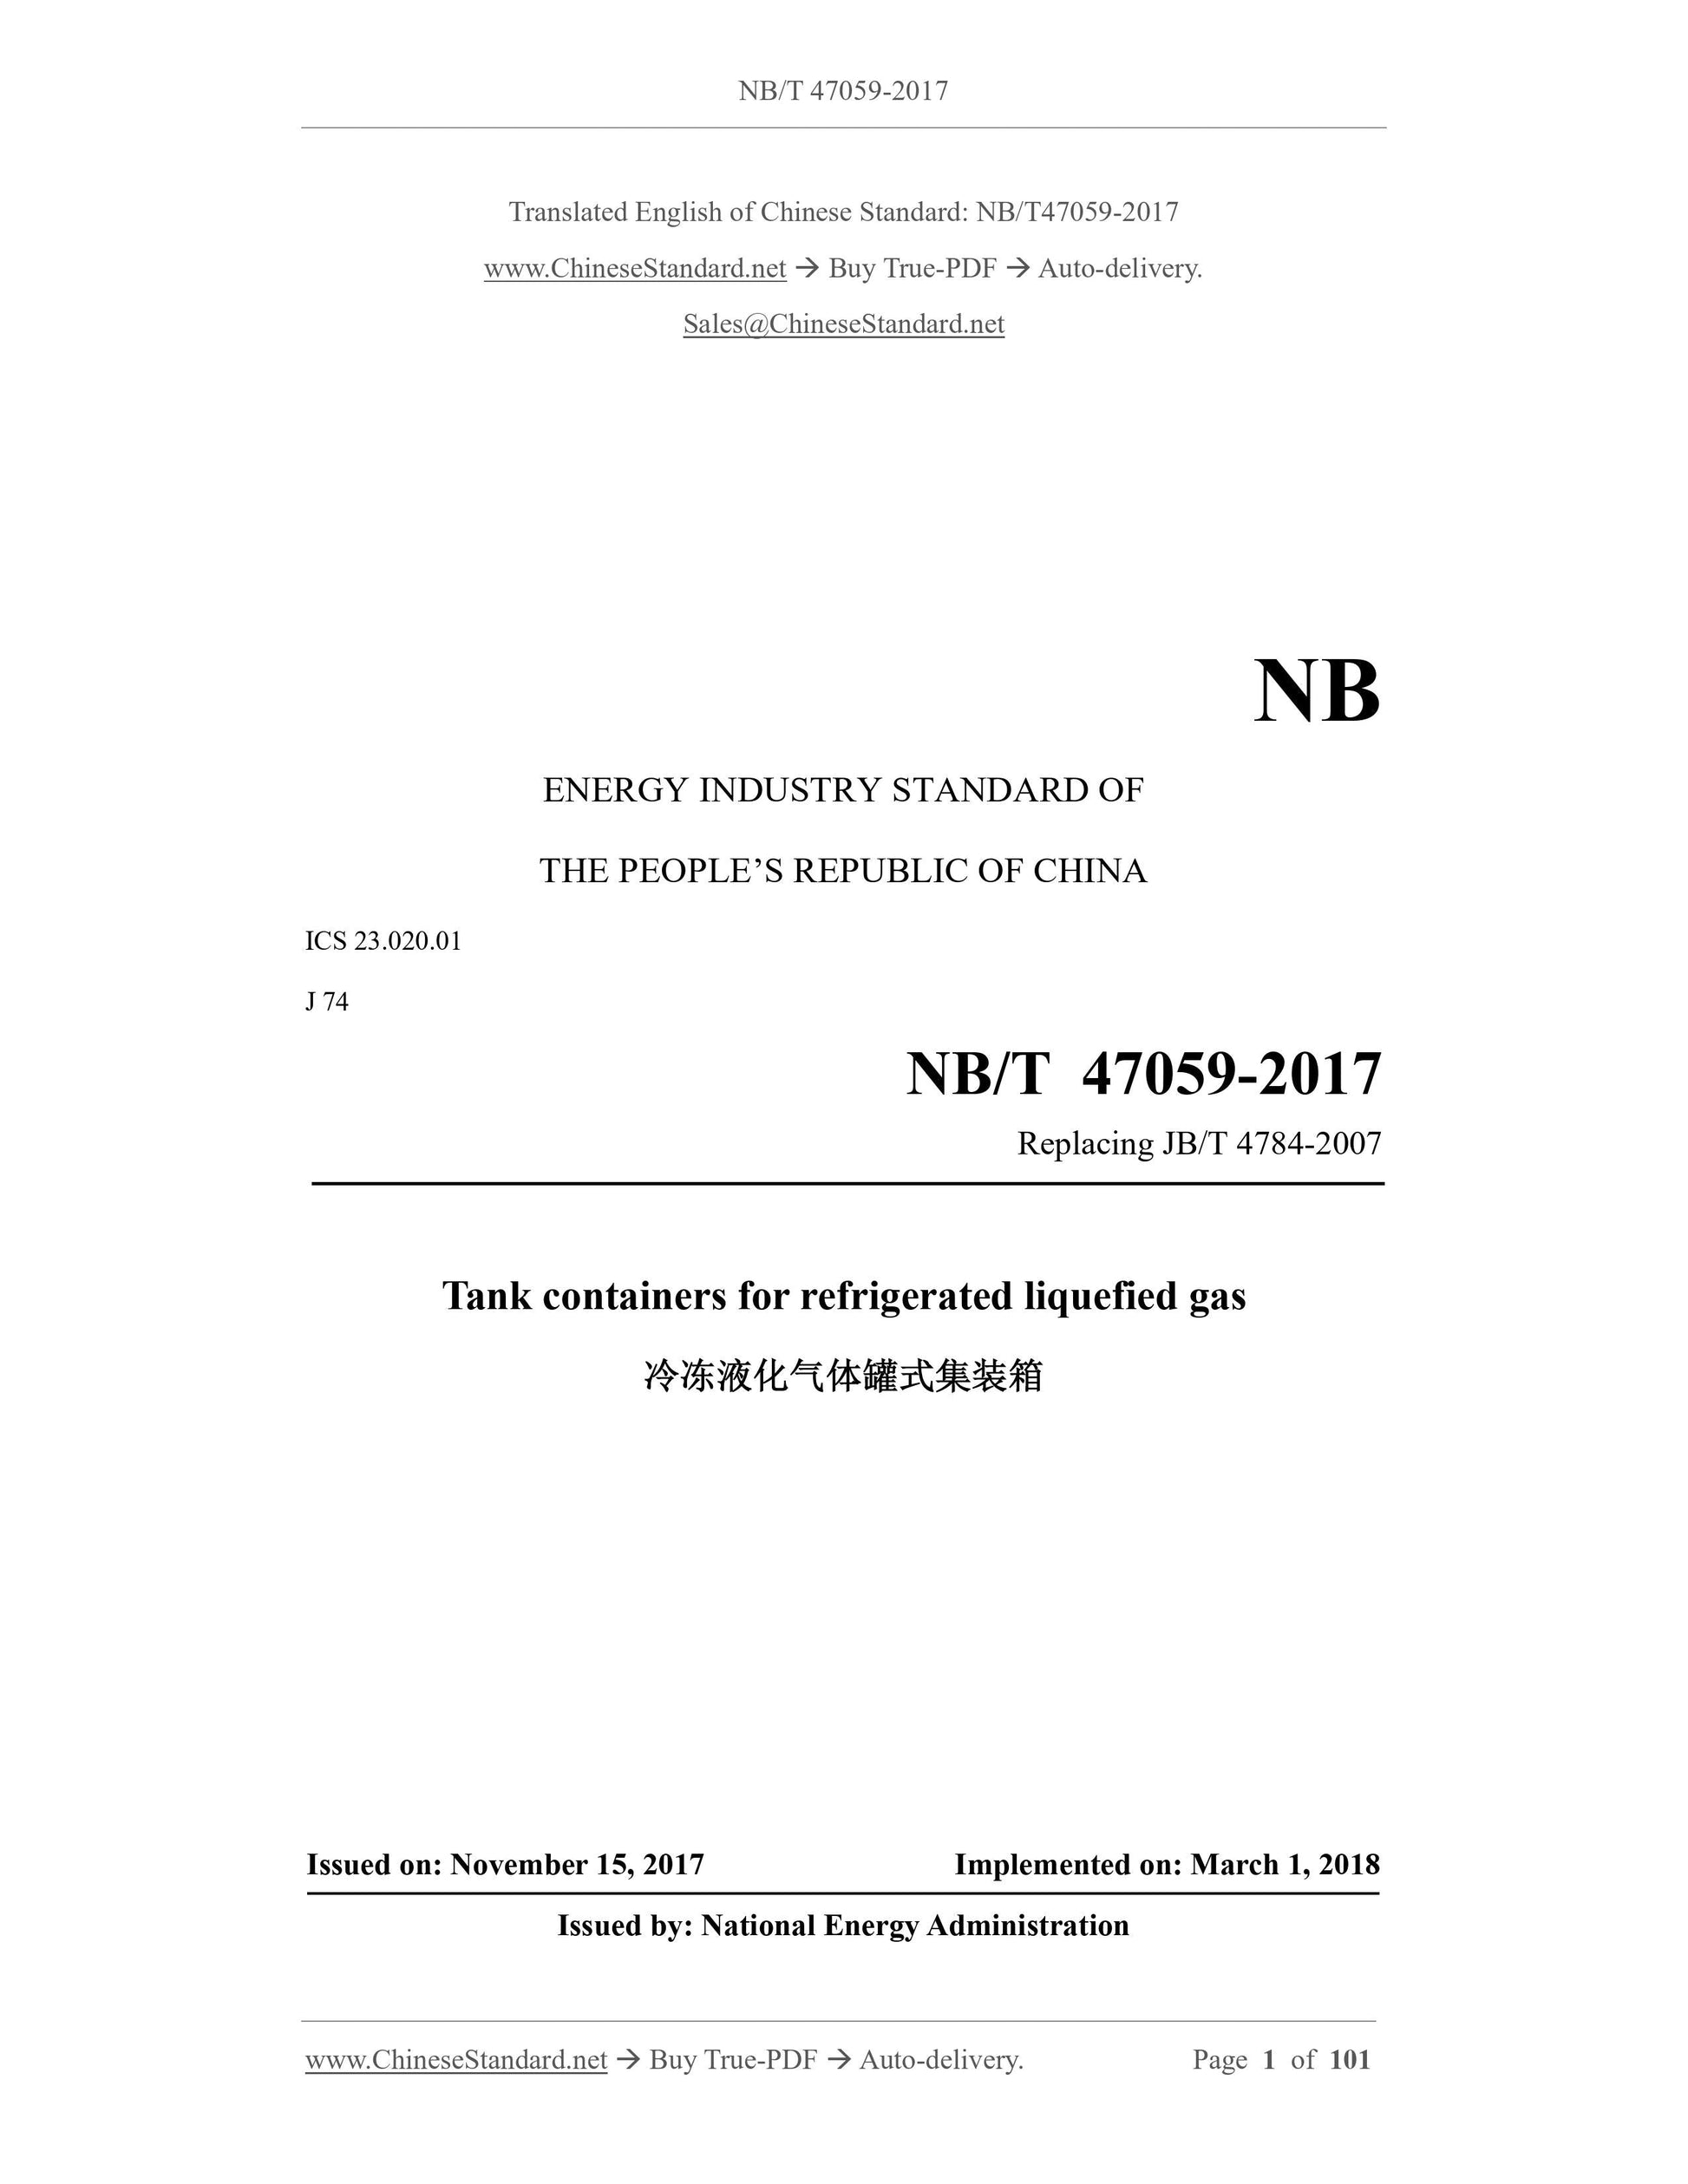 NB/T 47059-2017 Page 1